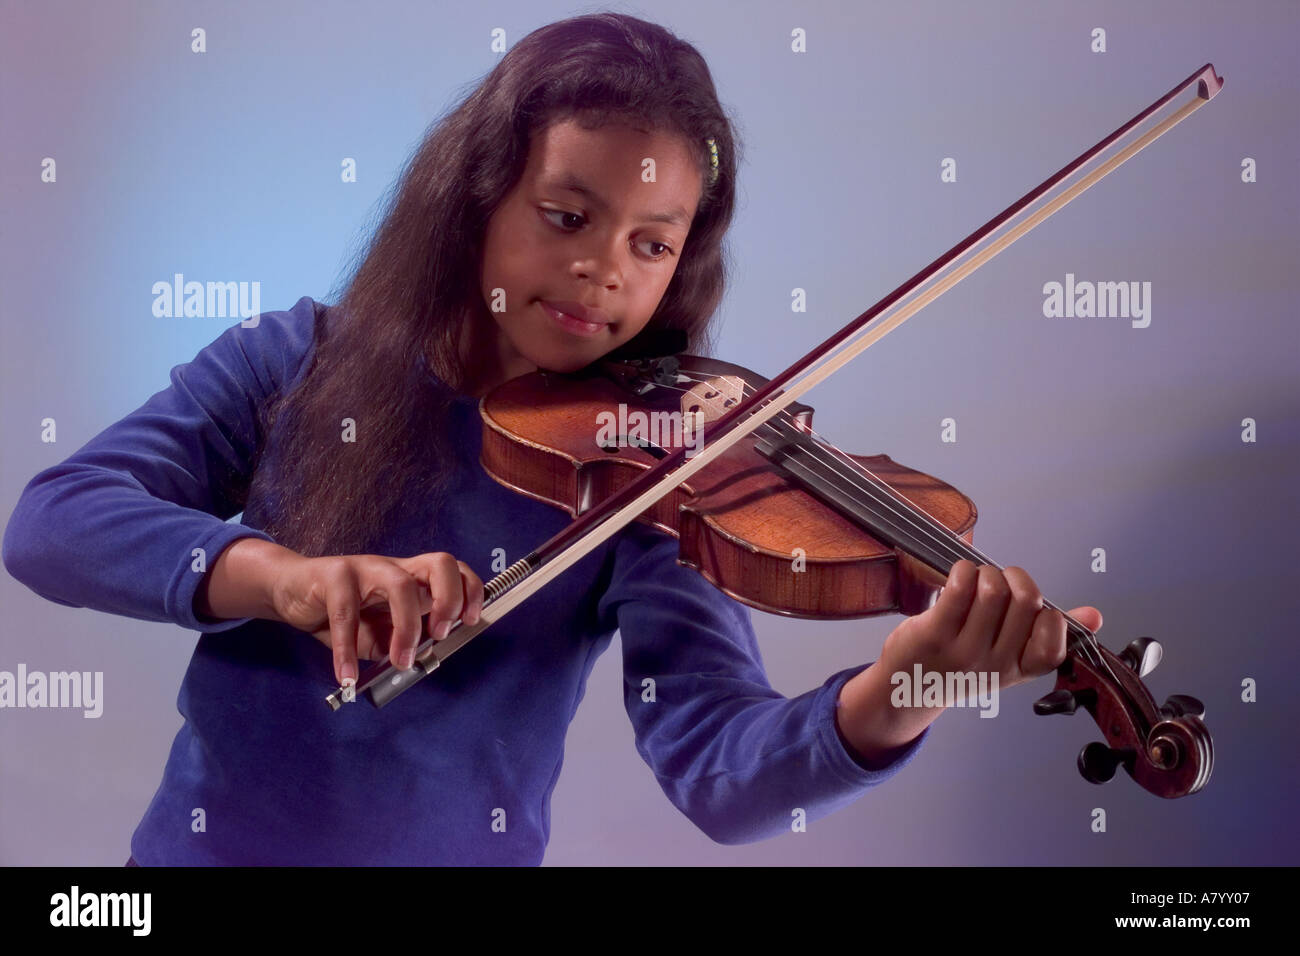 Young girl student violinist of ethnic origin practising playing the violin Stock Photo